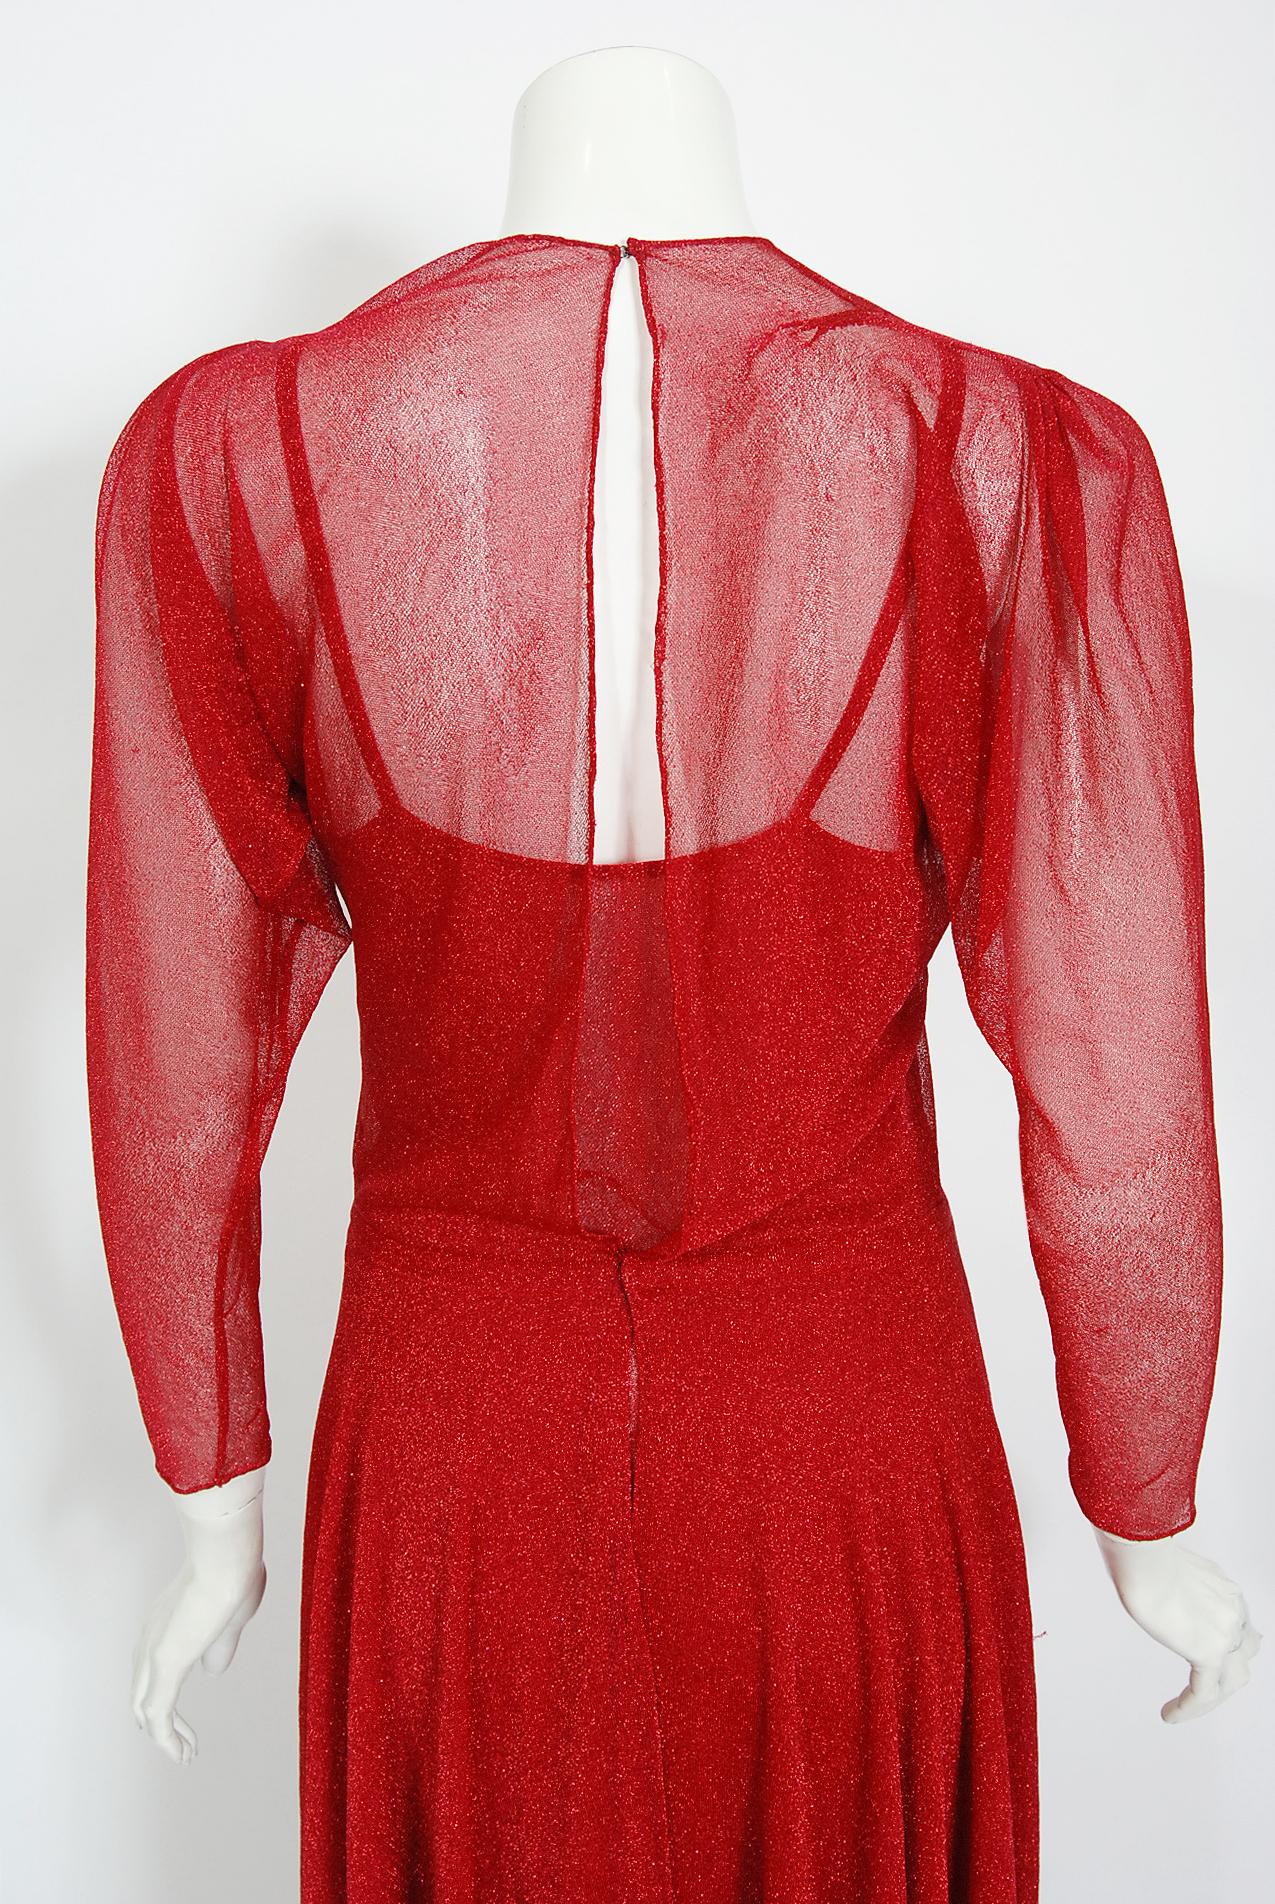 Vintage 1970's Halston Couture Red Metallic Sheer Knit Long-Sleeve Dress Gown For Sale 4